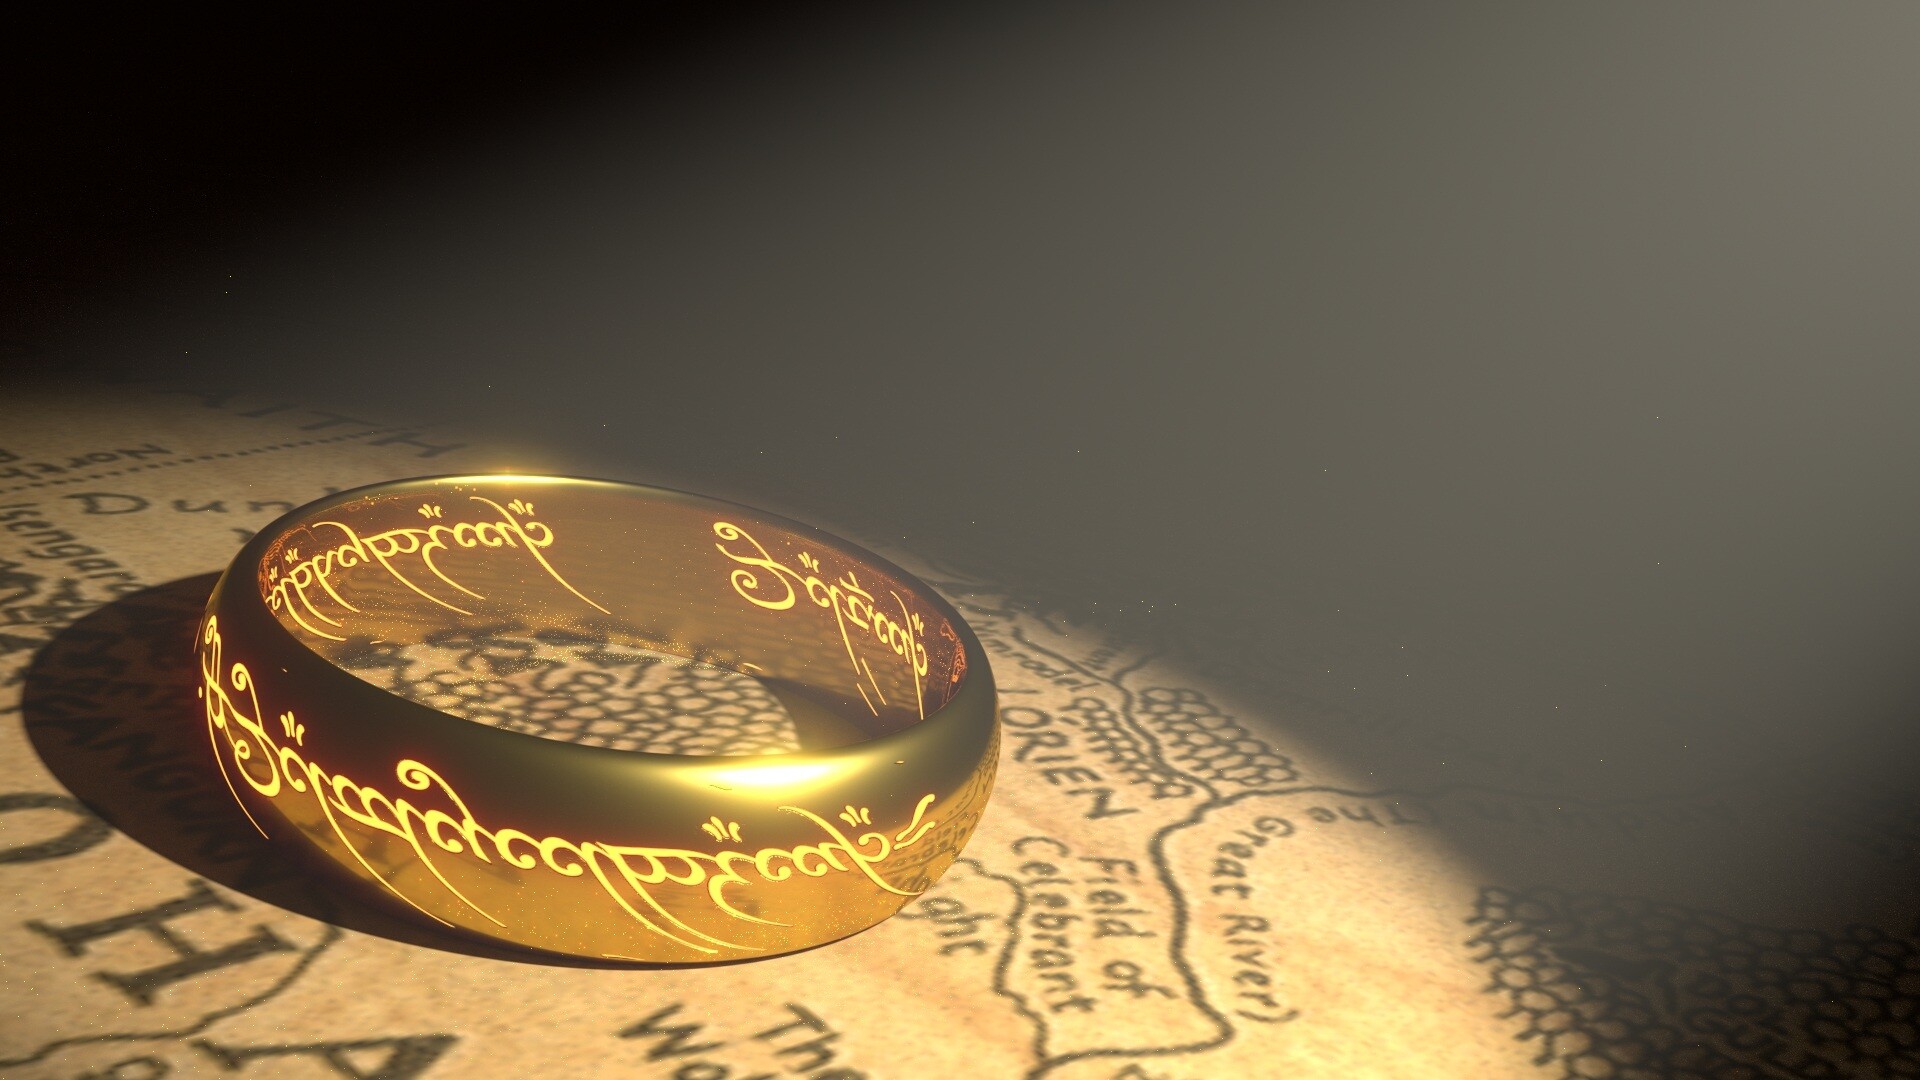 The Lord of the Rings: The Rings of Power, TV Shows, Free download fonts, Elvish typefaces, 1920x1080 Full HD Desktop